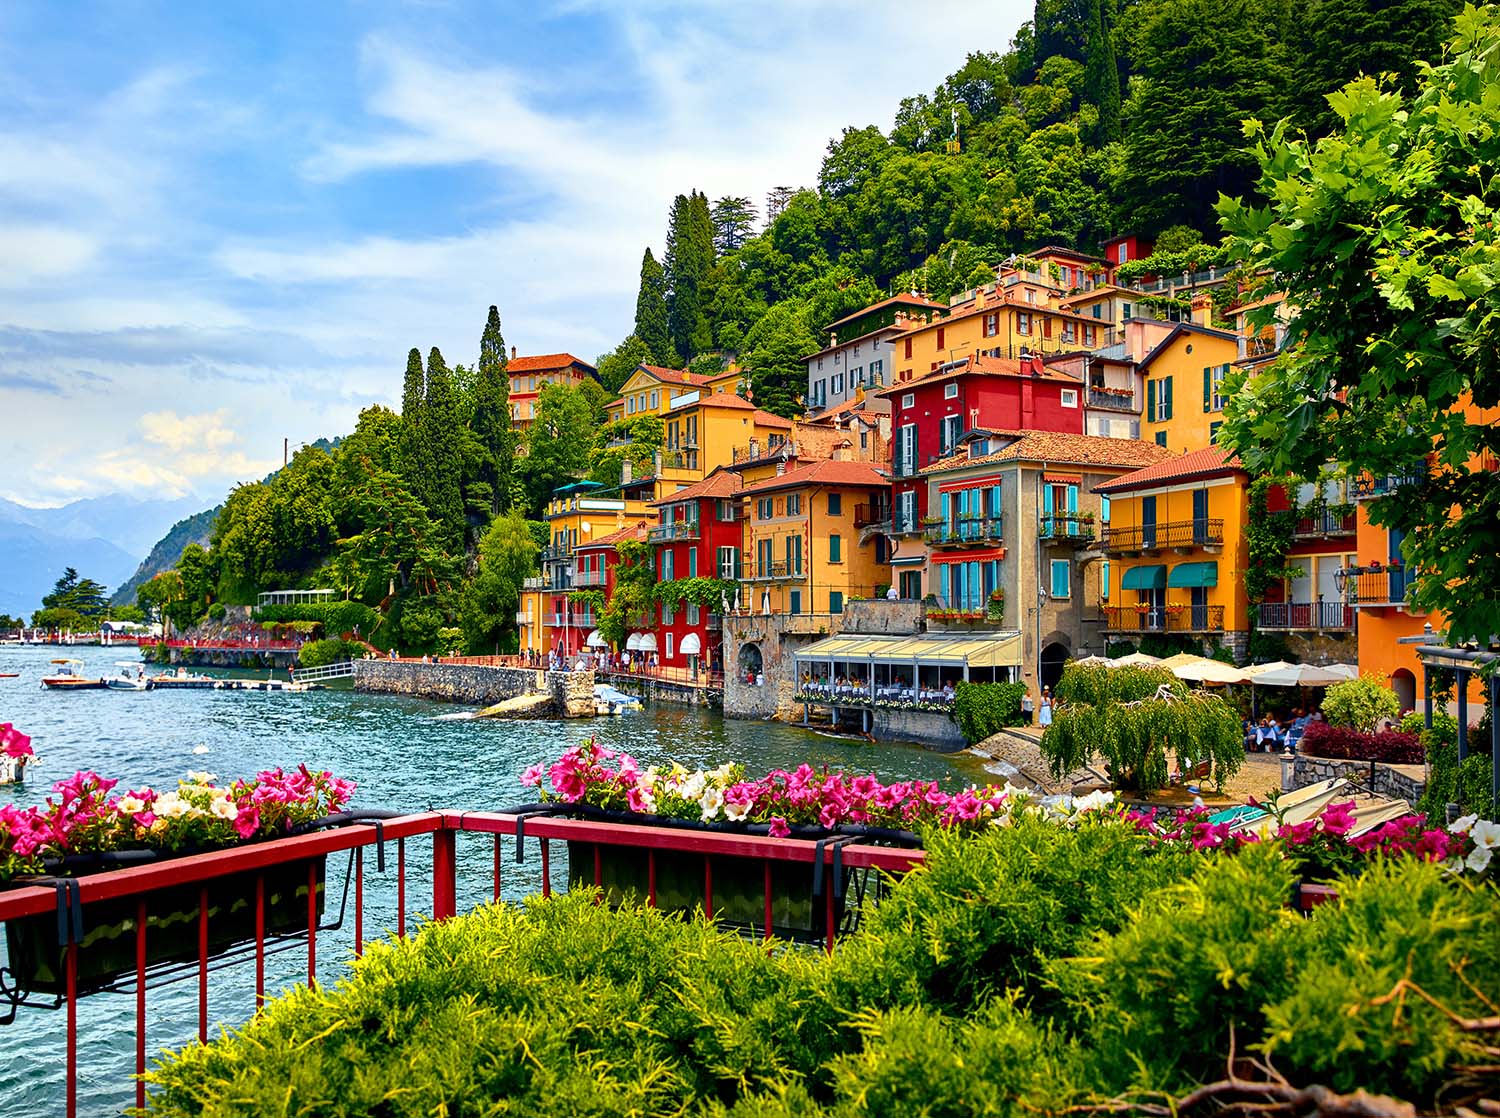 Mediterranean Houses in Varenna, Italy Travel Jigsaw Puzzle